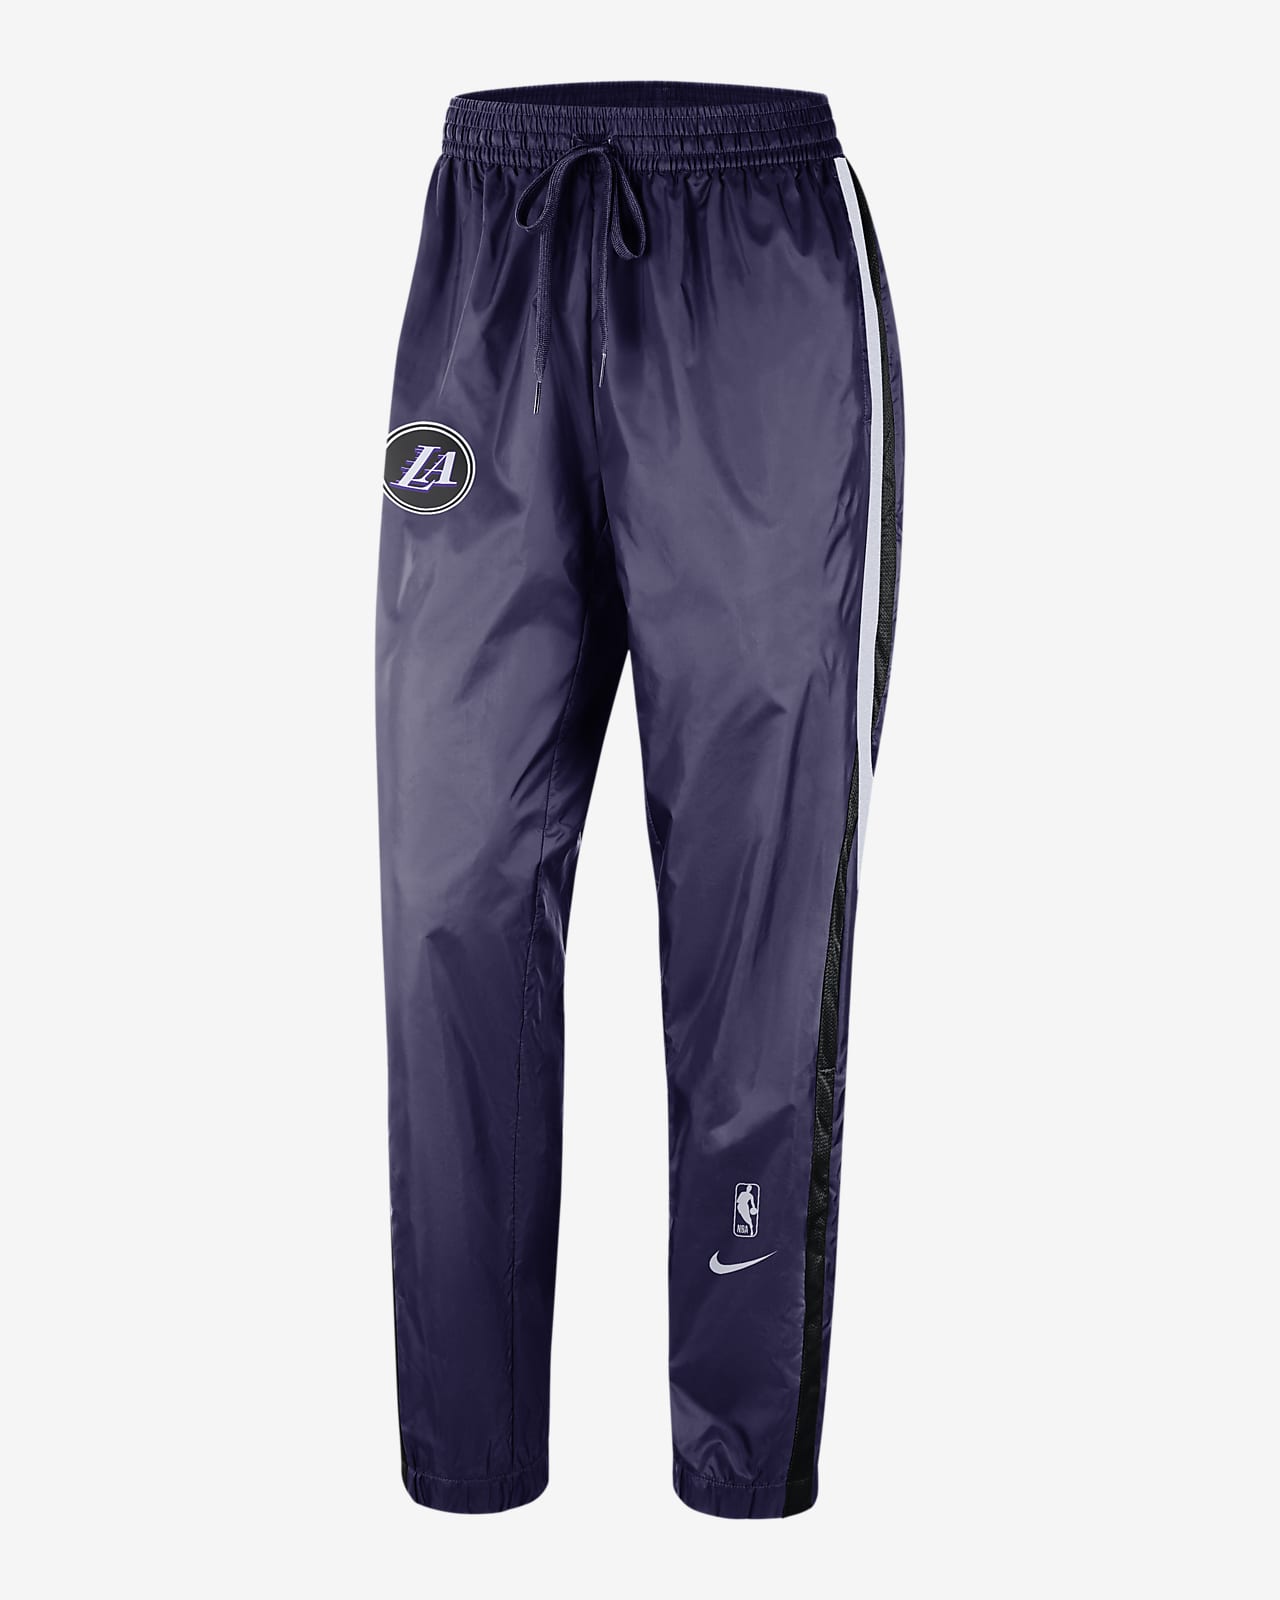 Los Angeles Lakers Courtside City Edition Women's Nike NBA Tracksuit Bottoms